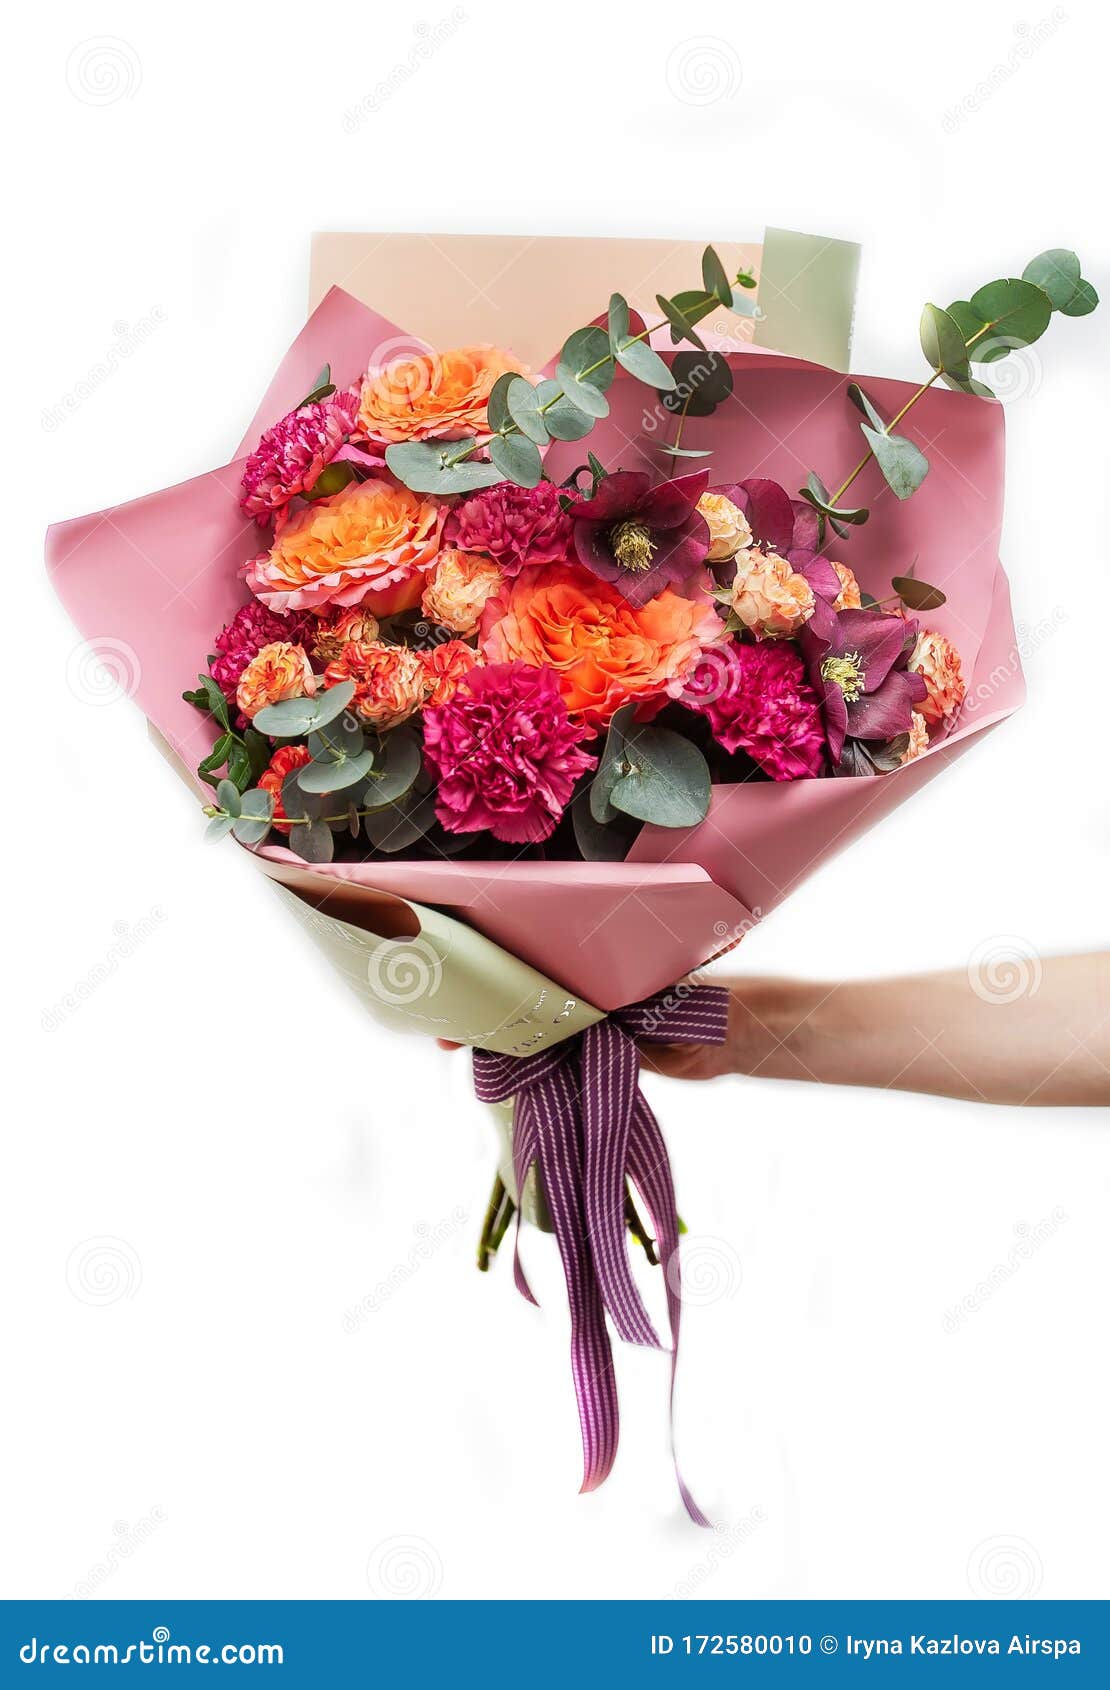 Florist Holding a Colorful Bouquet of Flowers in Her Hand Stock ...